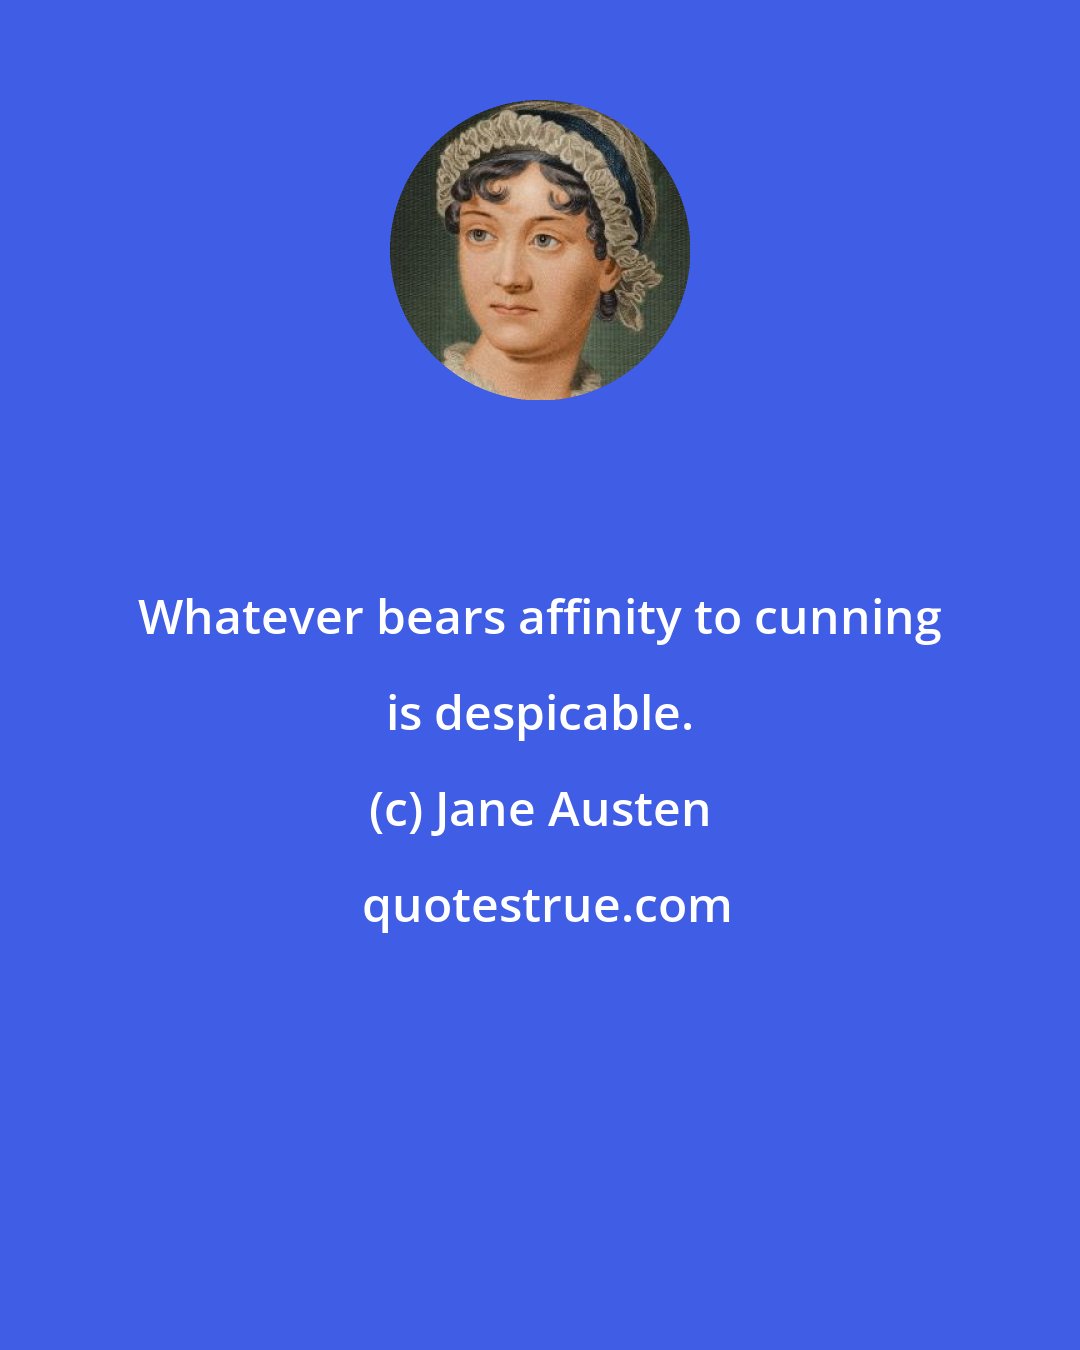 Jane Austen: Whatever bears affinity to cunning is despicable.